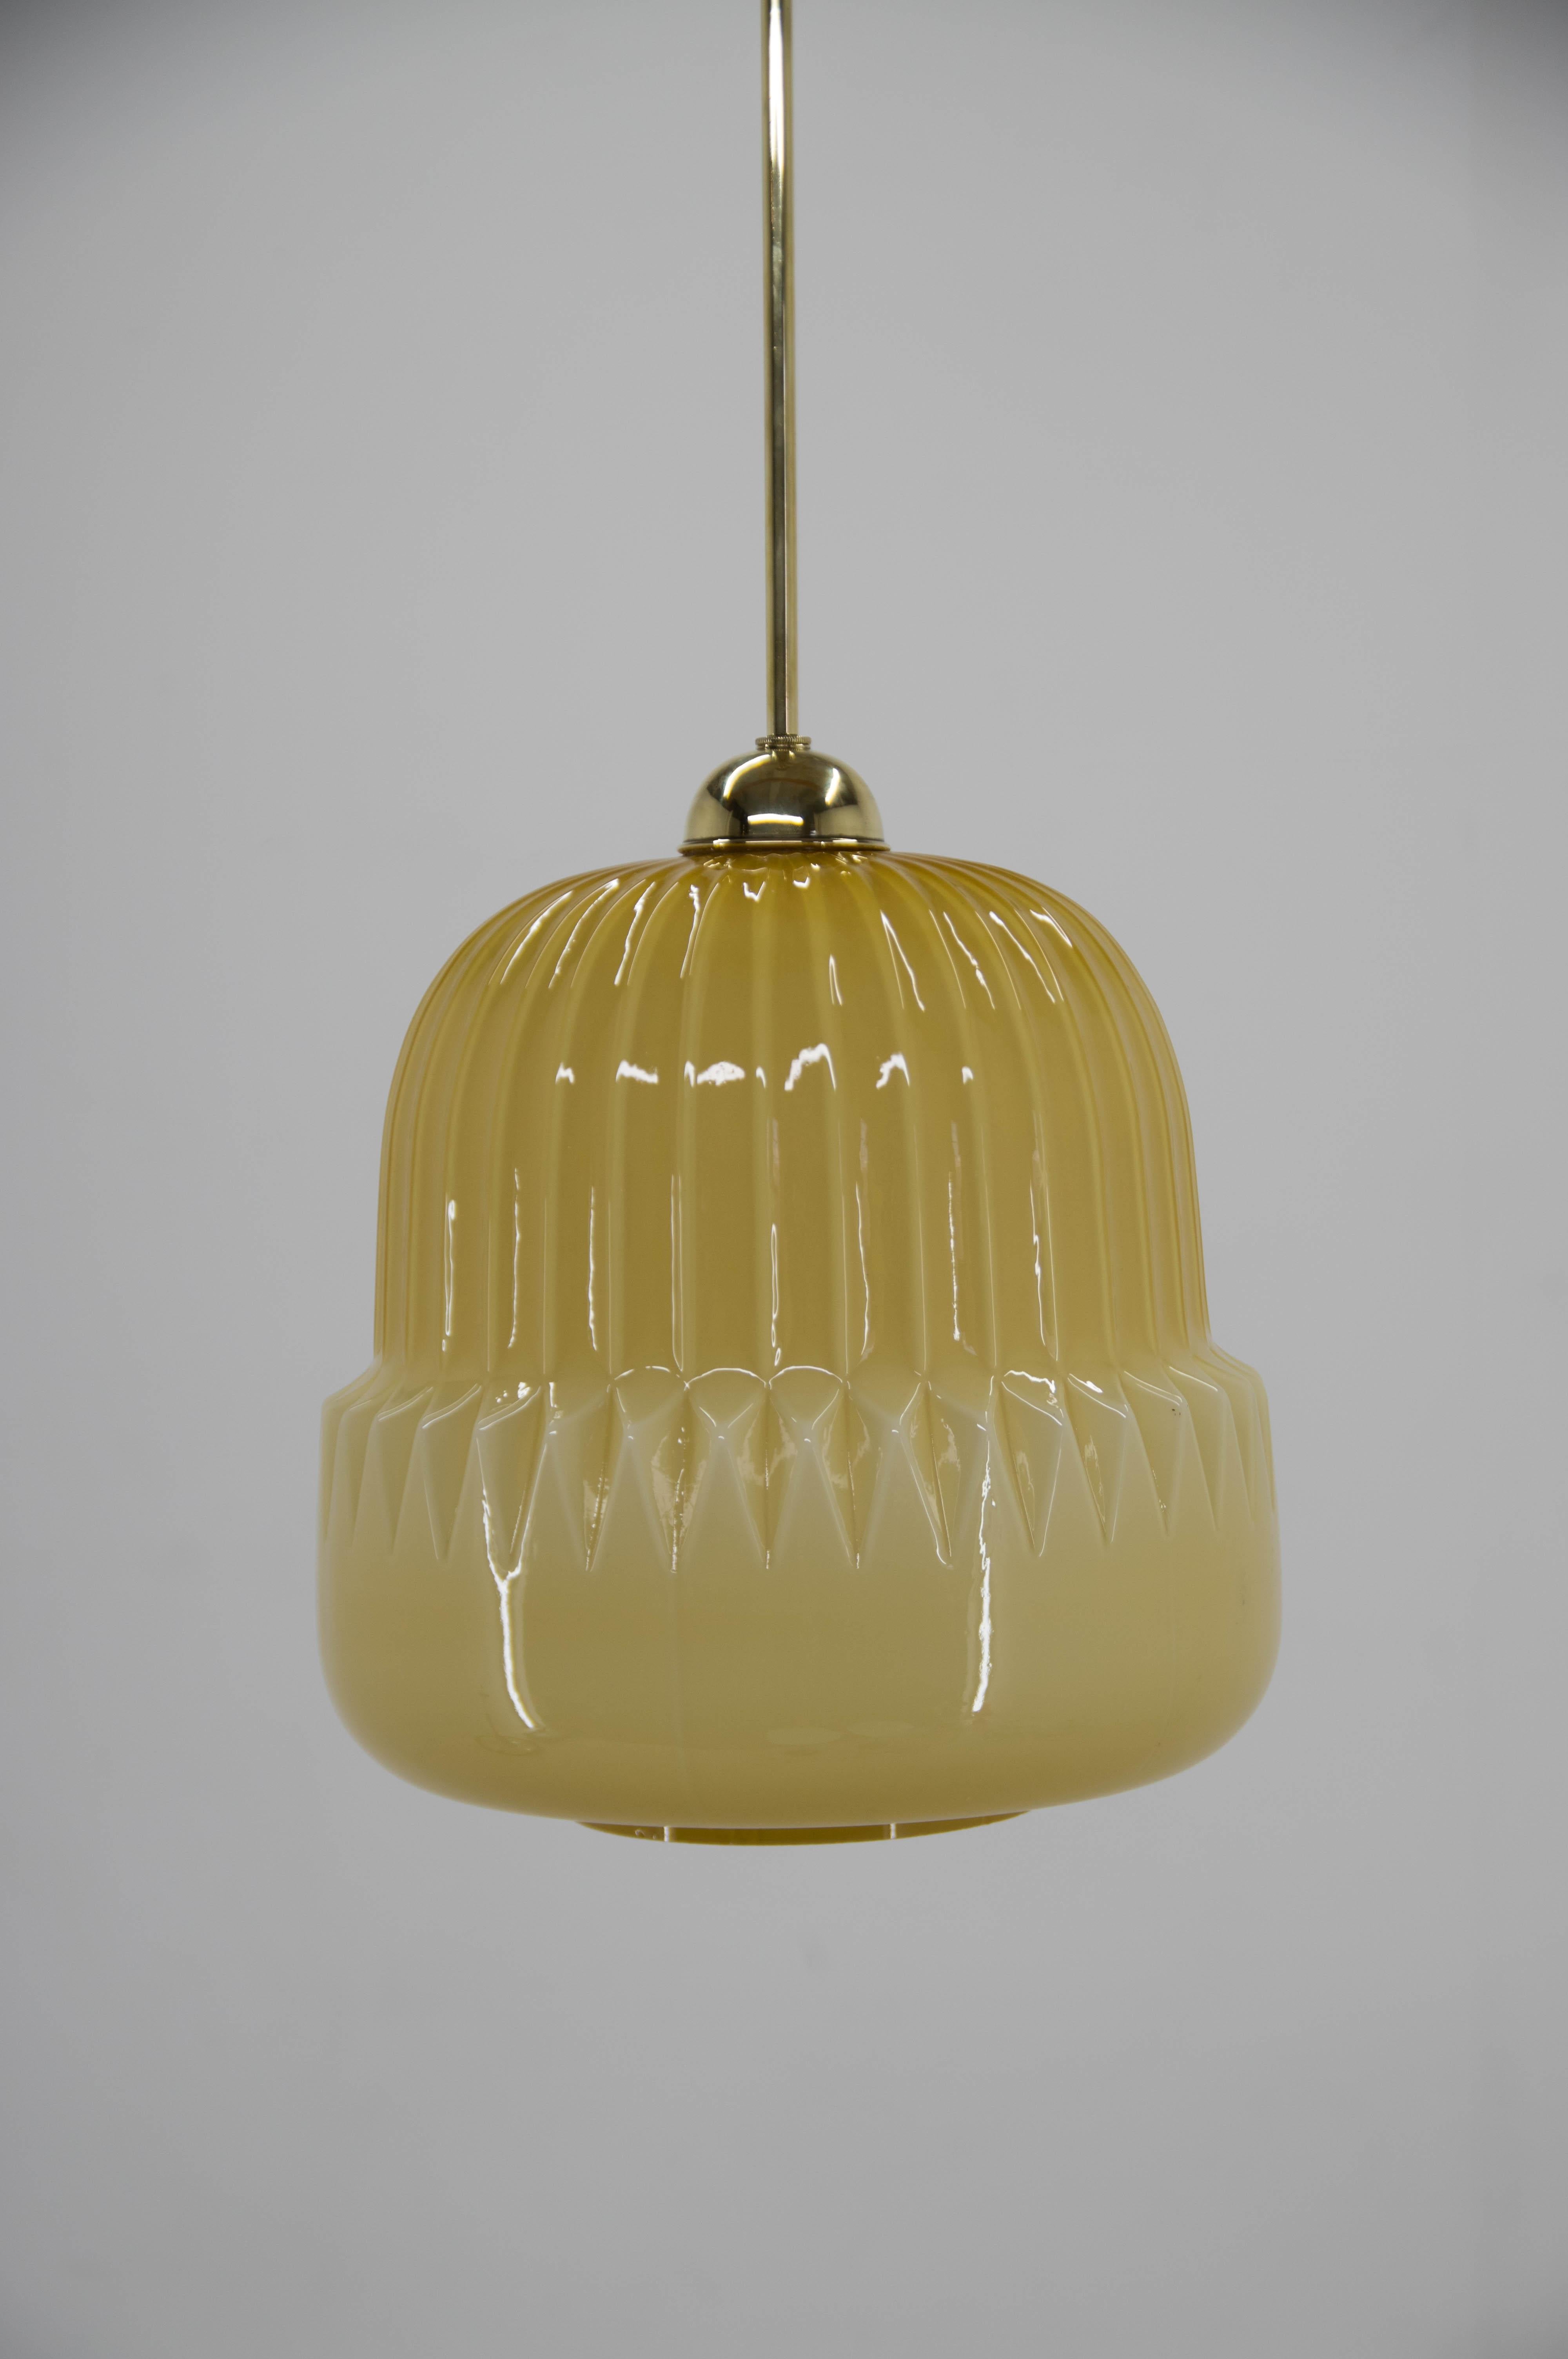 Dark yellow midcentury pendant made of glass and brass.
Glass in good condition with one little chip on bottom visible on picture.
Central rod can be shorten on request.
Rewired: 1x100W, E25-E27 bulb
US wiring compatible.